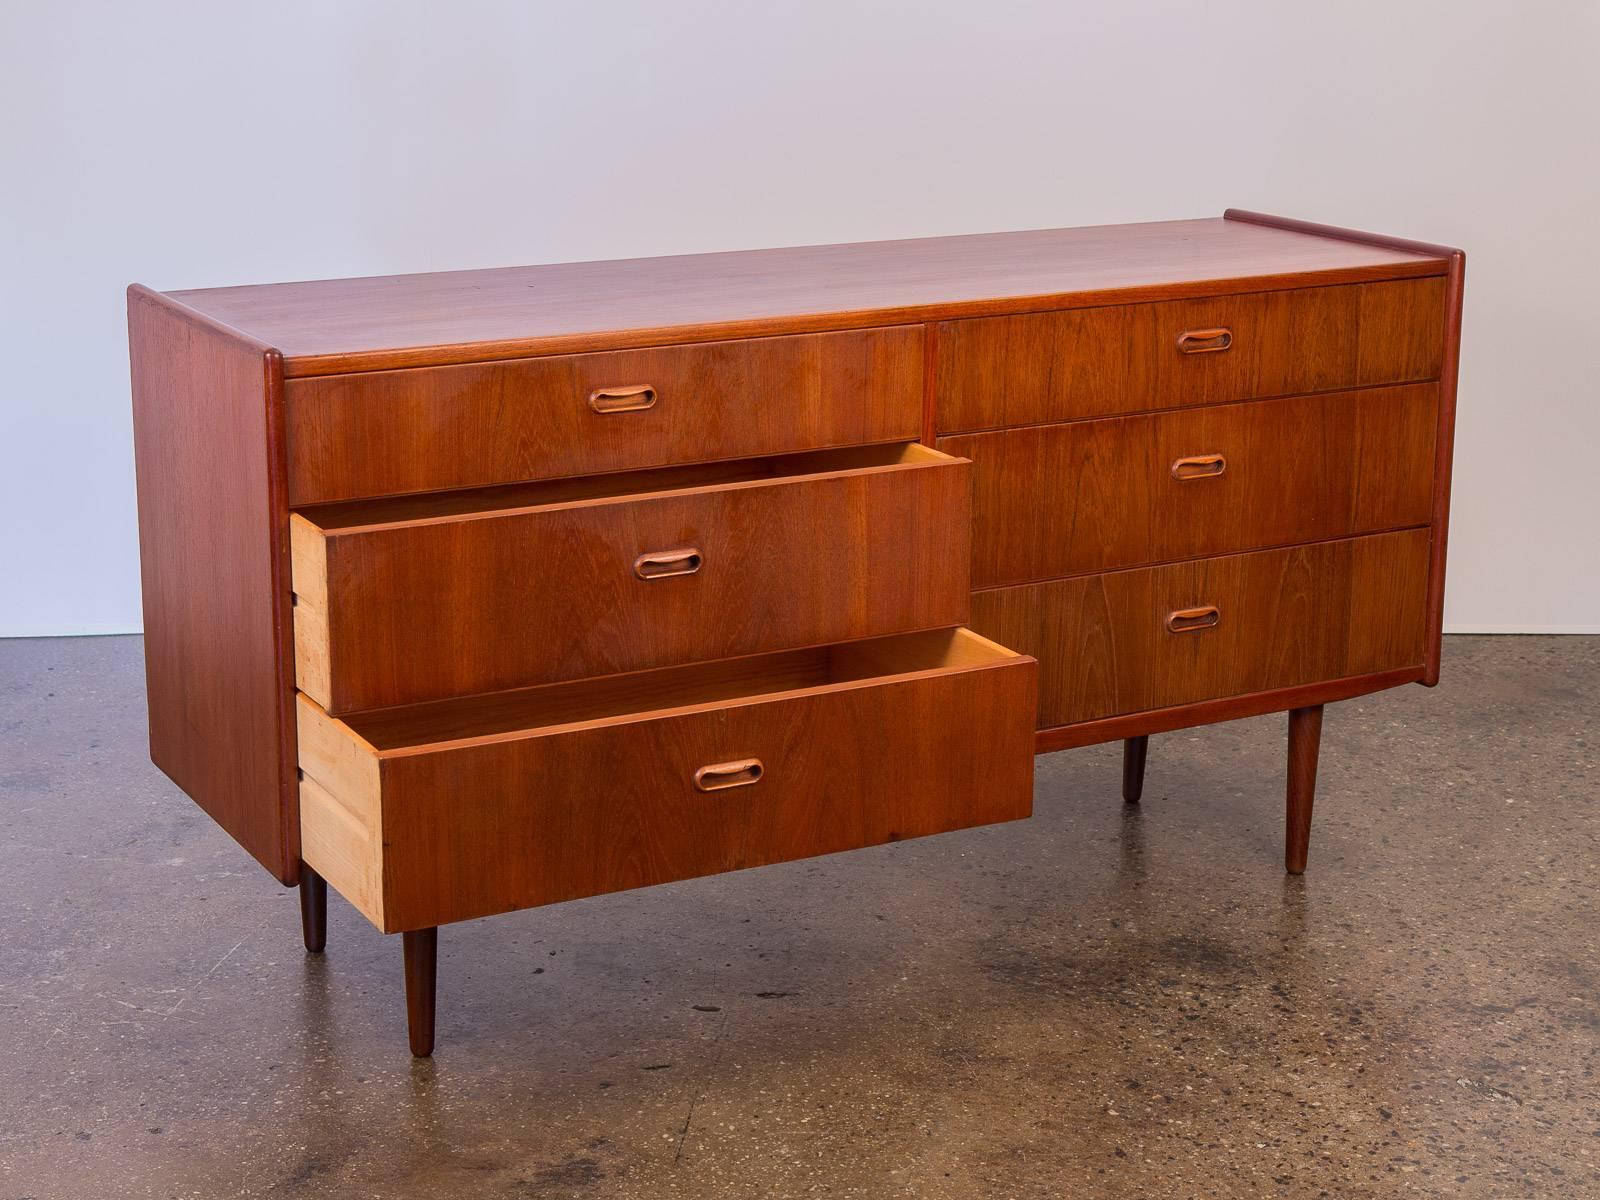 1960s, Danish modern teak double dresser. In excellent vintage condition. Handsome teak with a distinct wood grain. Top is free of indentations or rings, very clean. Top two drawers measure 4.5